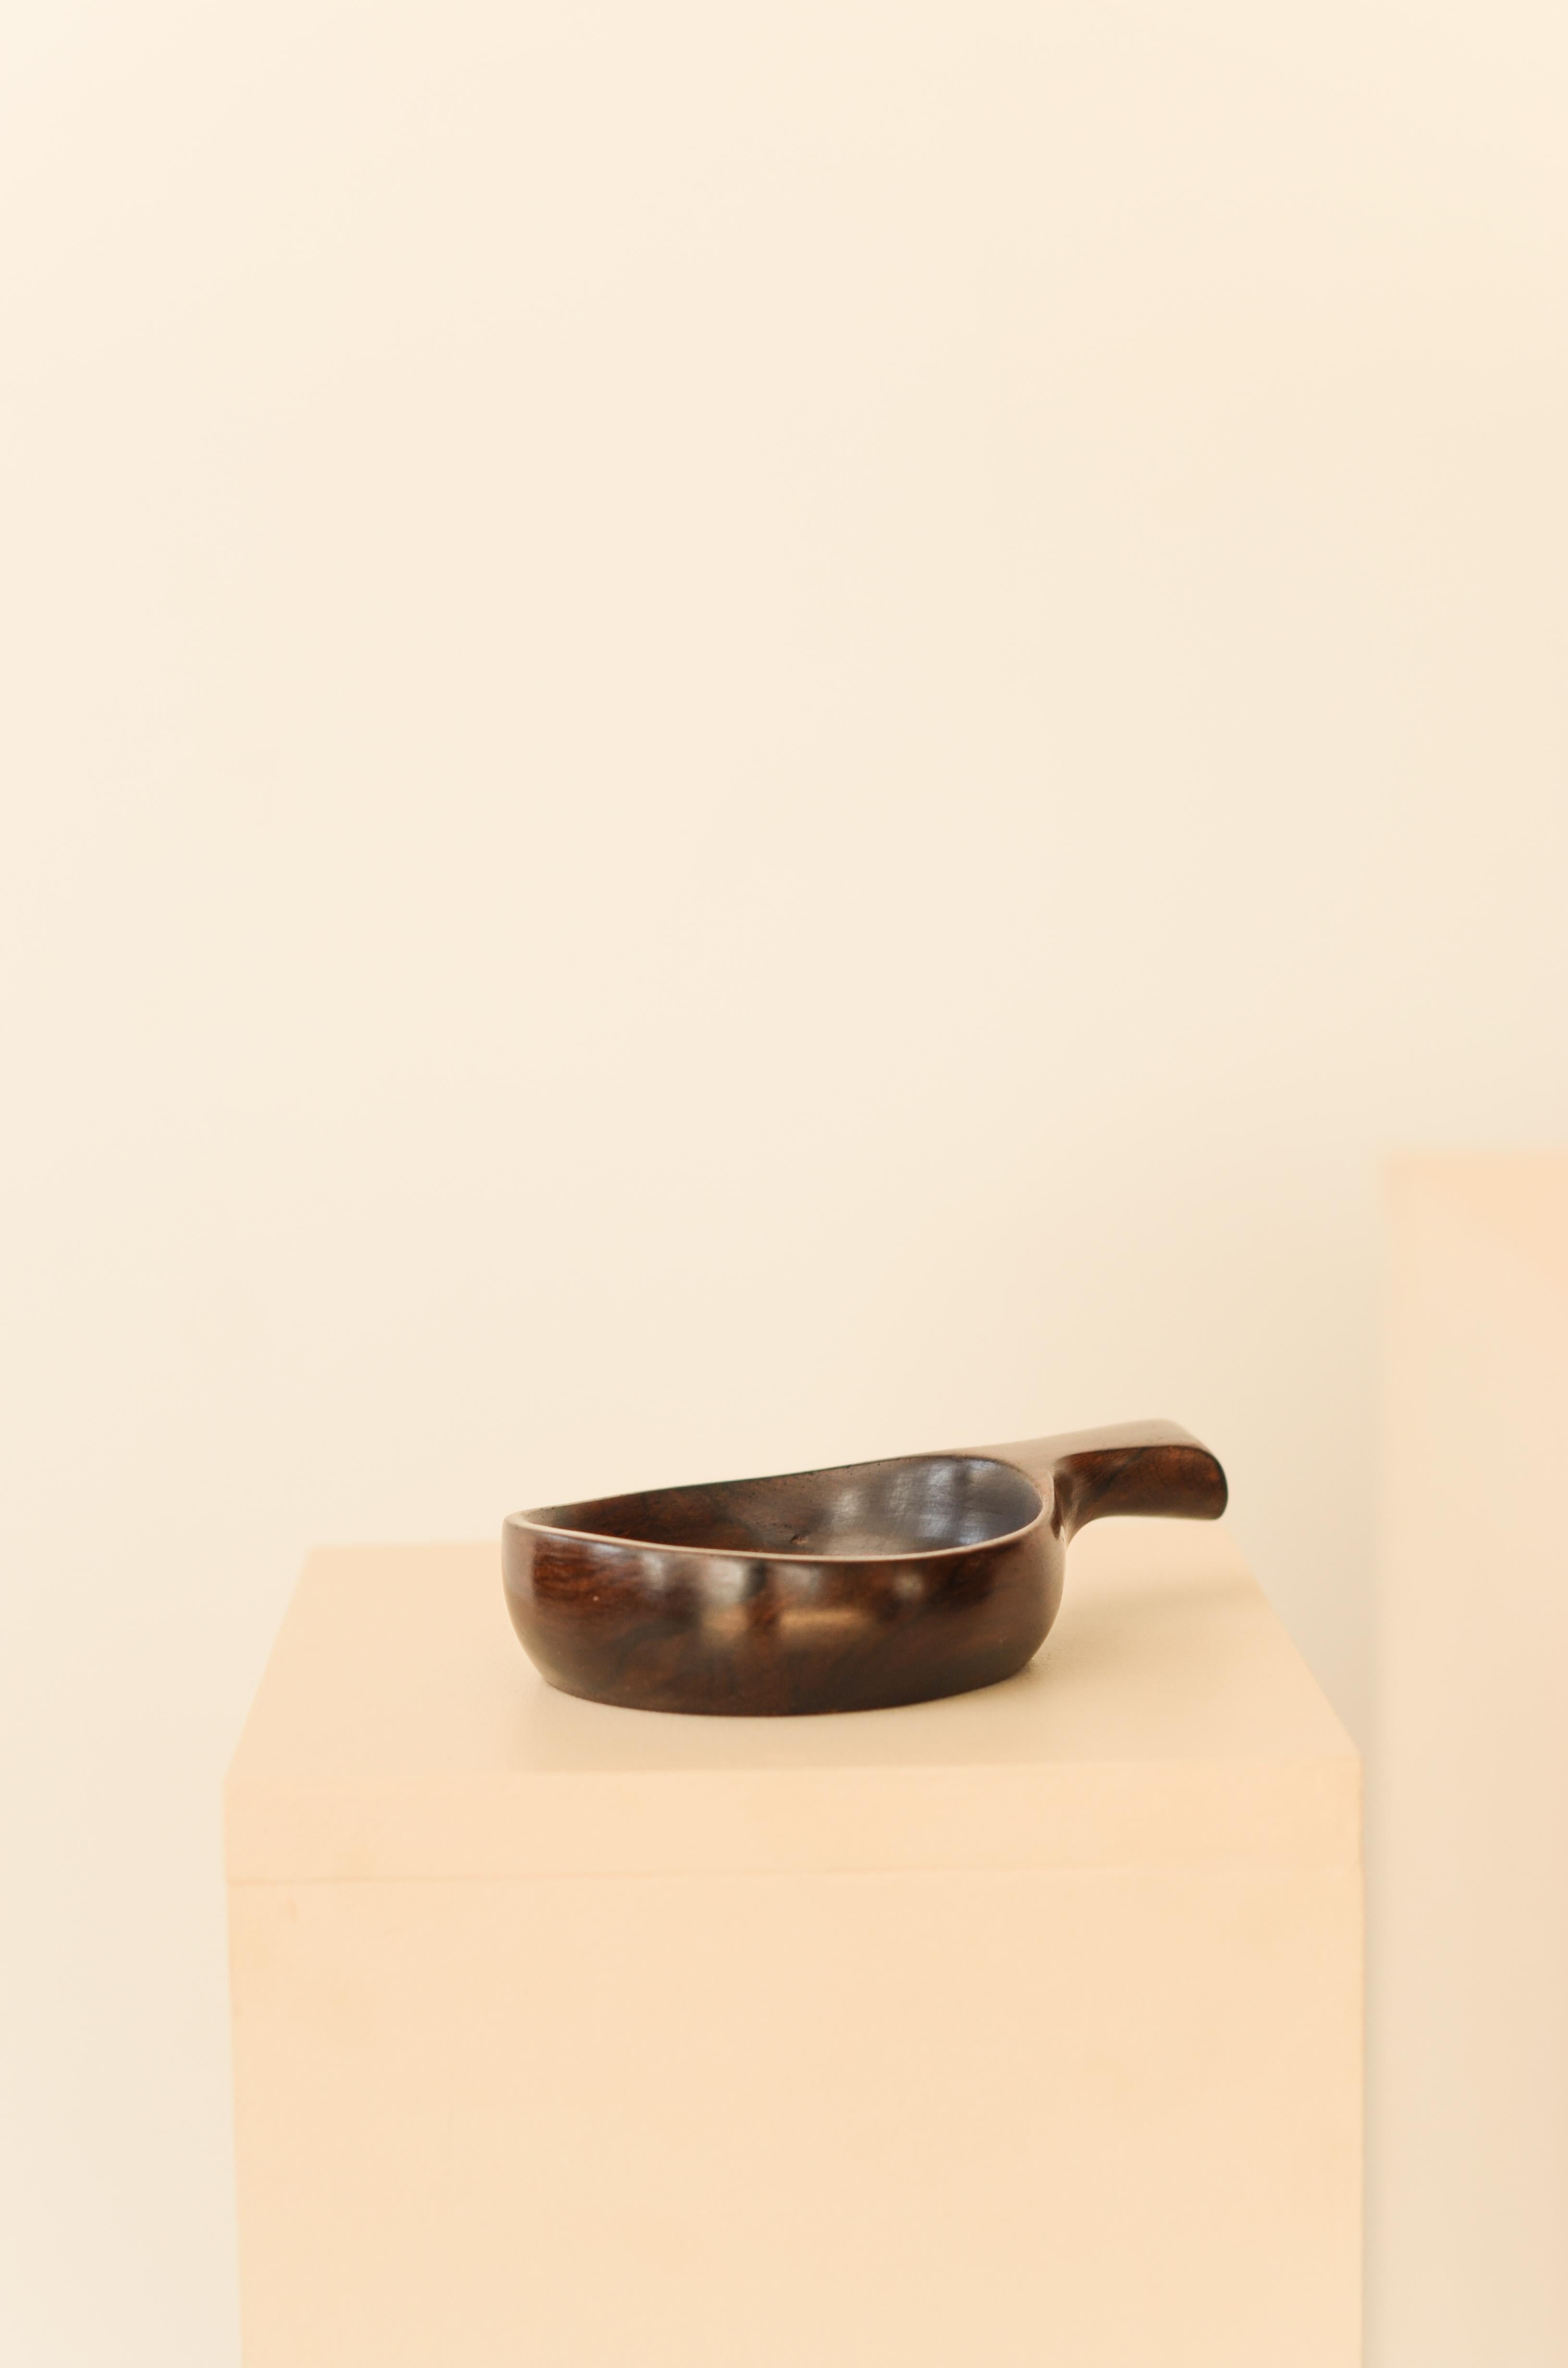 Brazilian Mid-Century Small Bowl #102 in Noble Wood by WoodArt In Good Condition For Sale In Rio De Janeiro, RJ